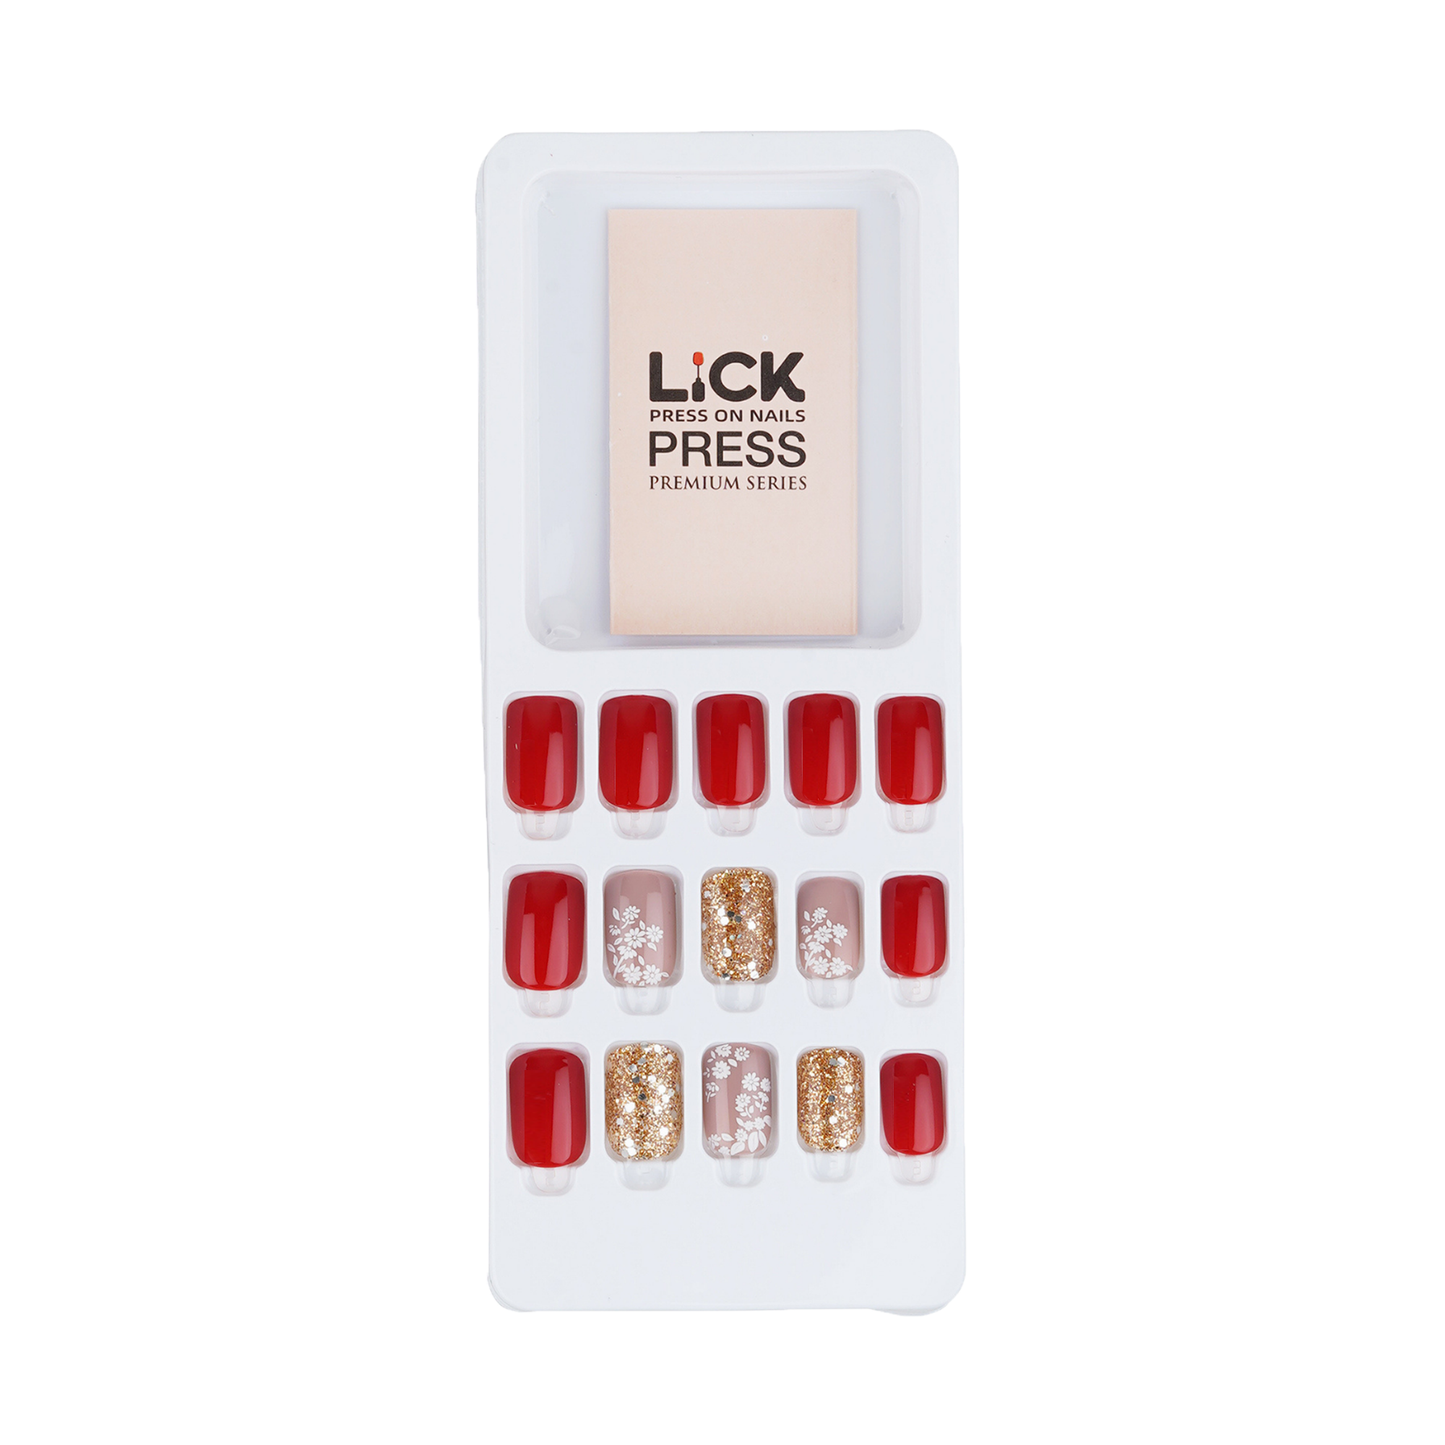 LICK NAILS French Tip forest Green Press on Nails